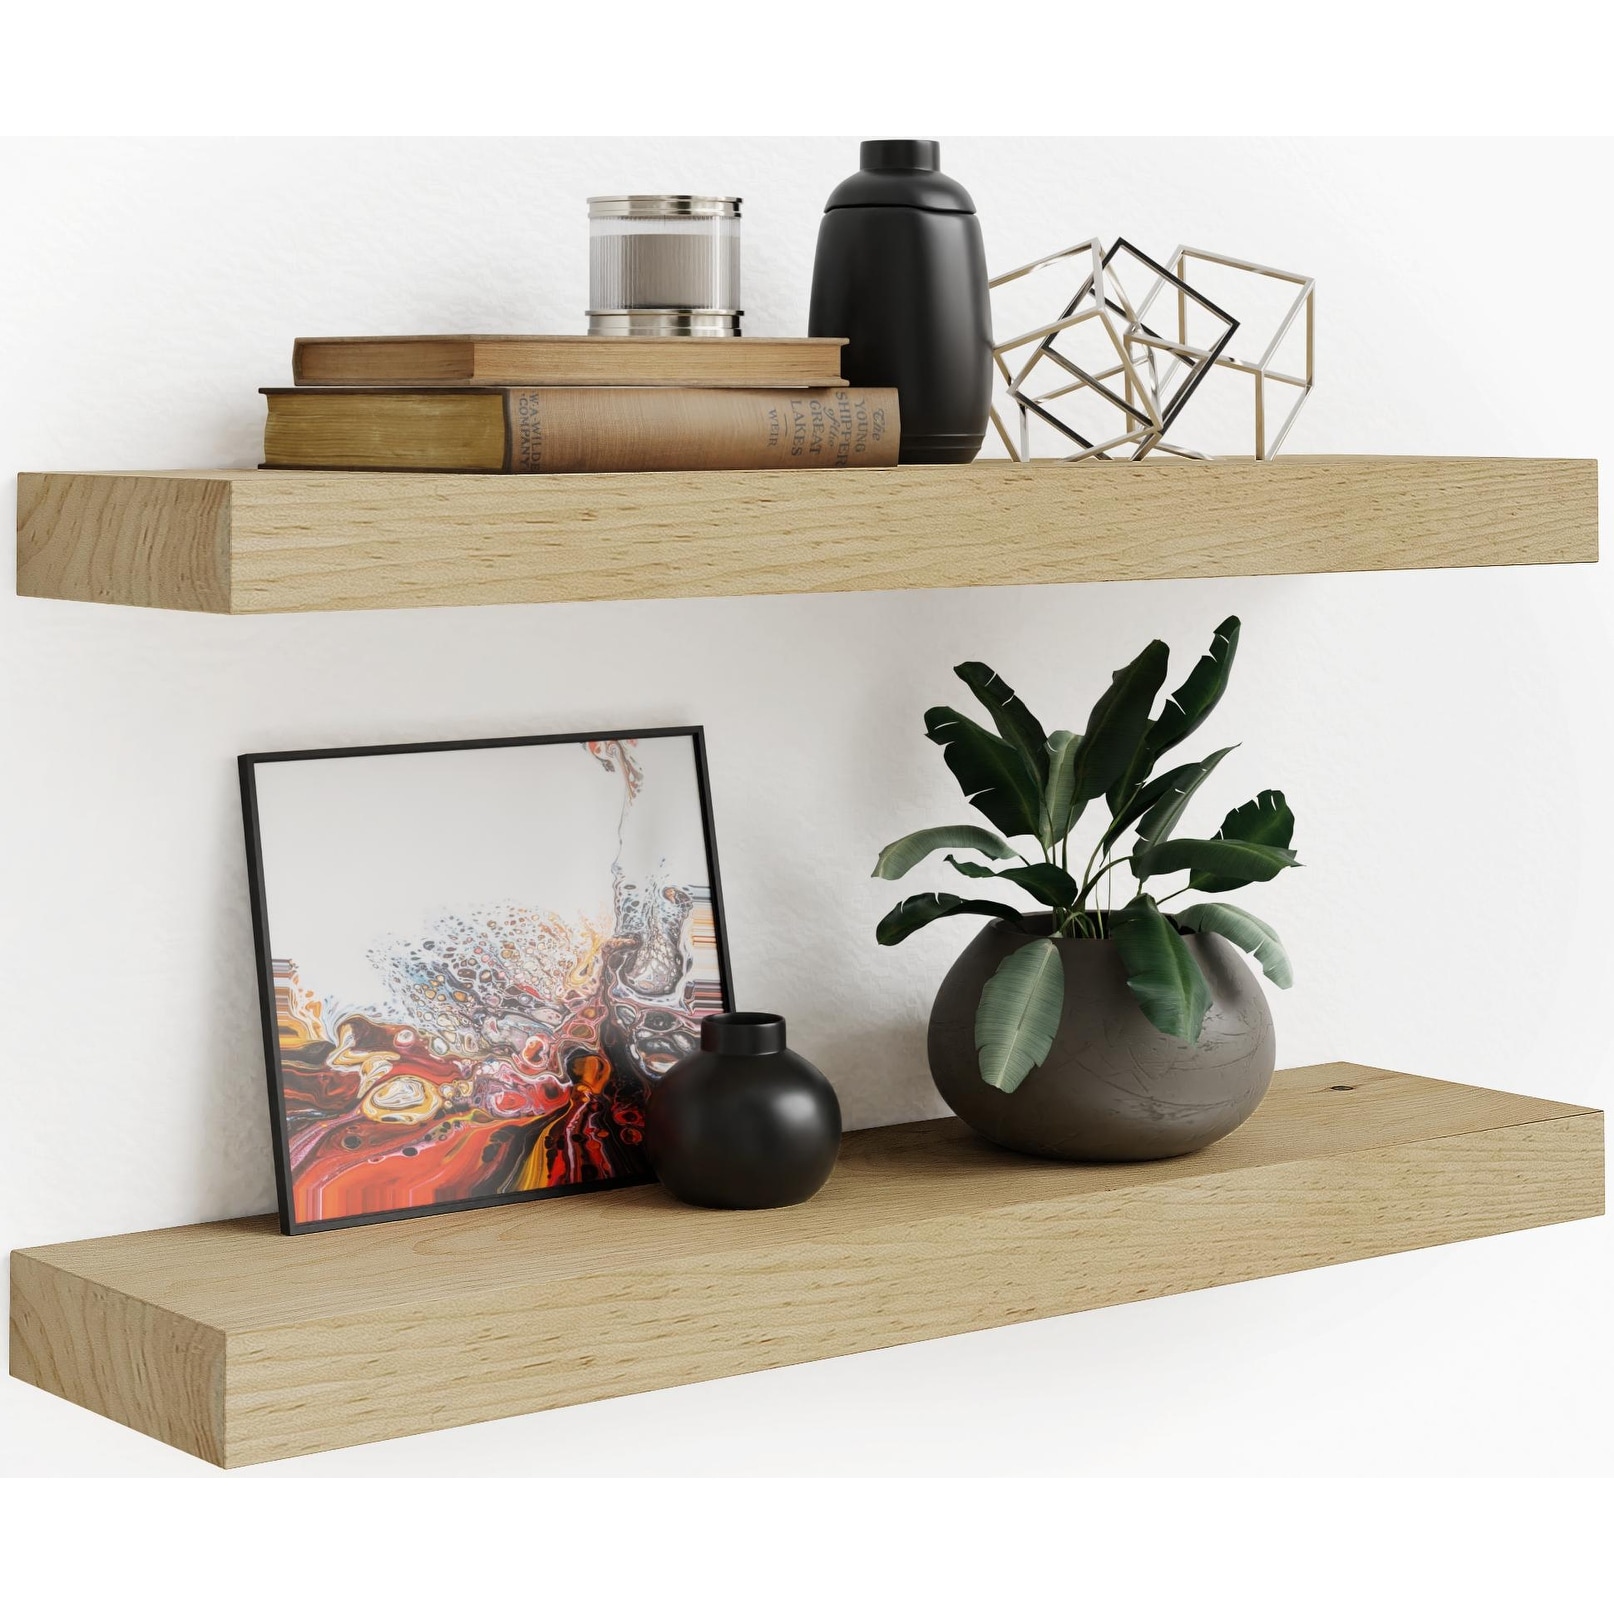 Making Floating Wall Shelves From One Sheet of Plywood 